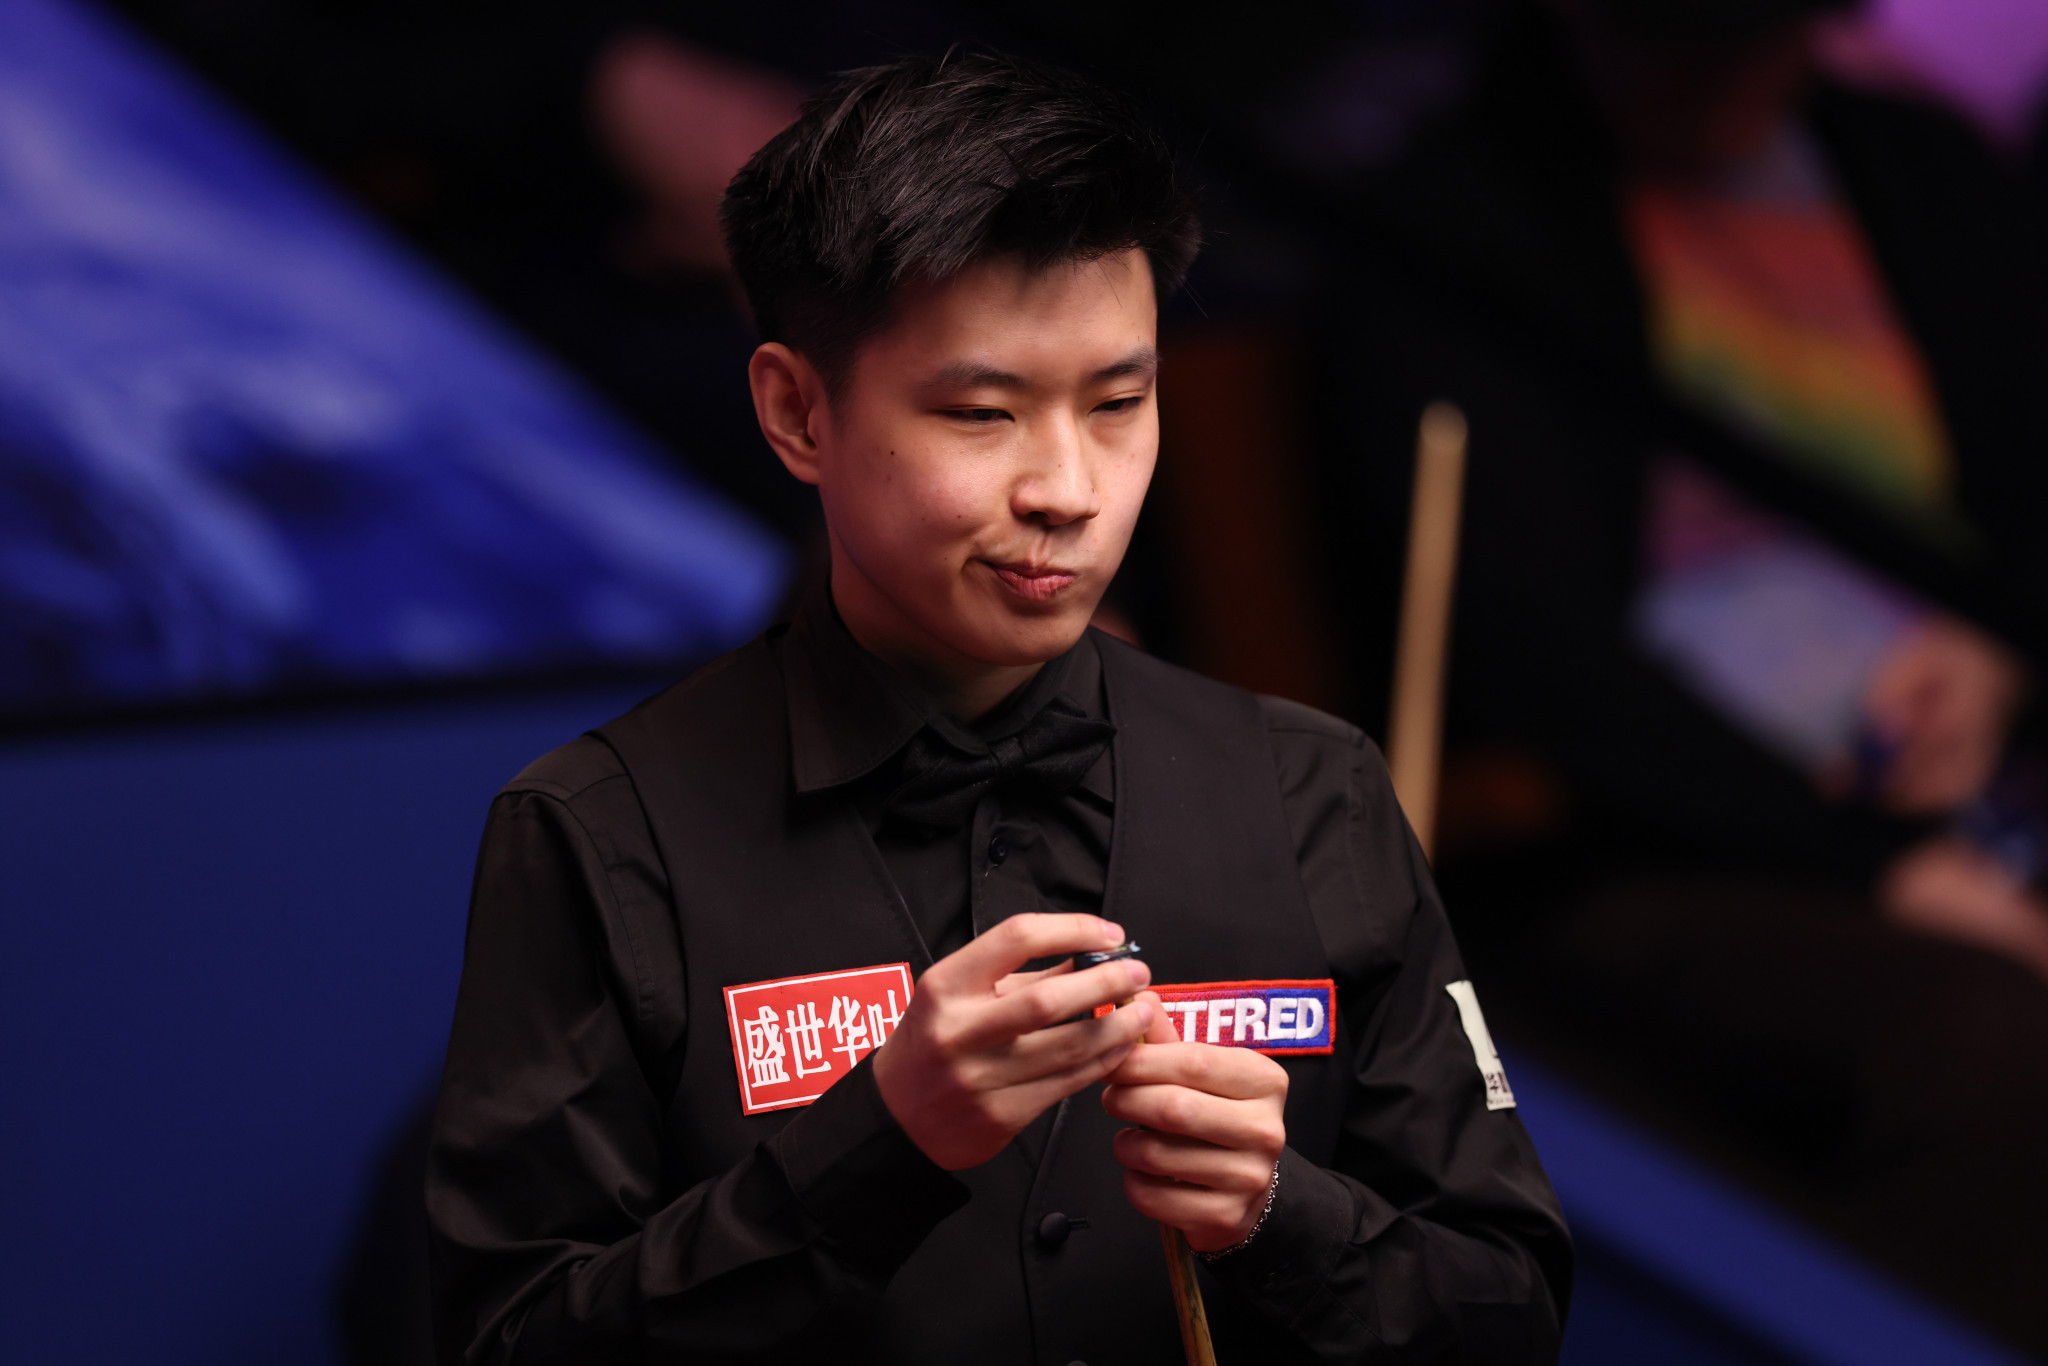 Zhao among 10 Chinese snooker players embroiled in match-fixing charges